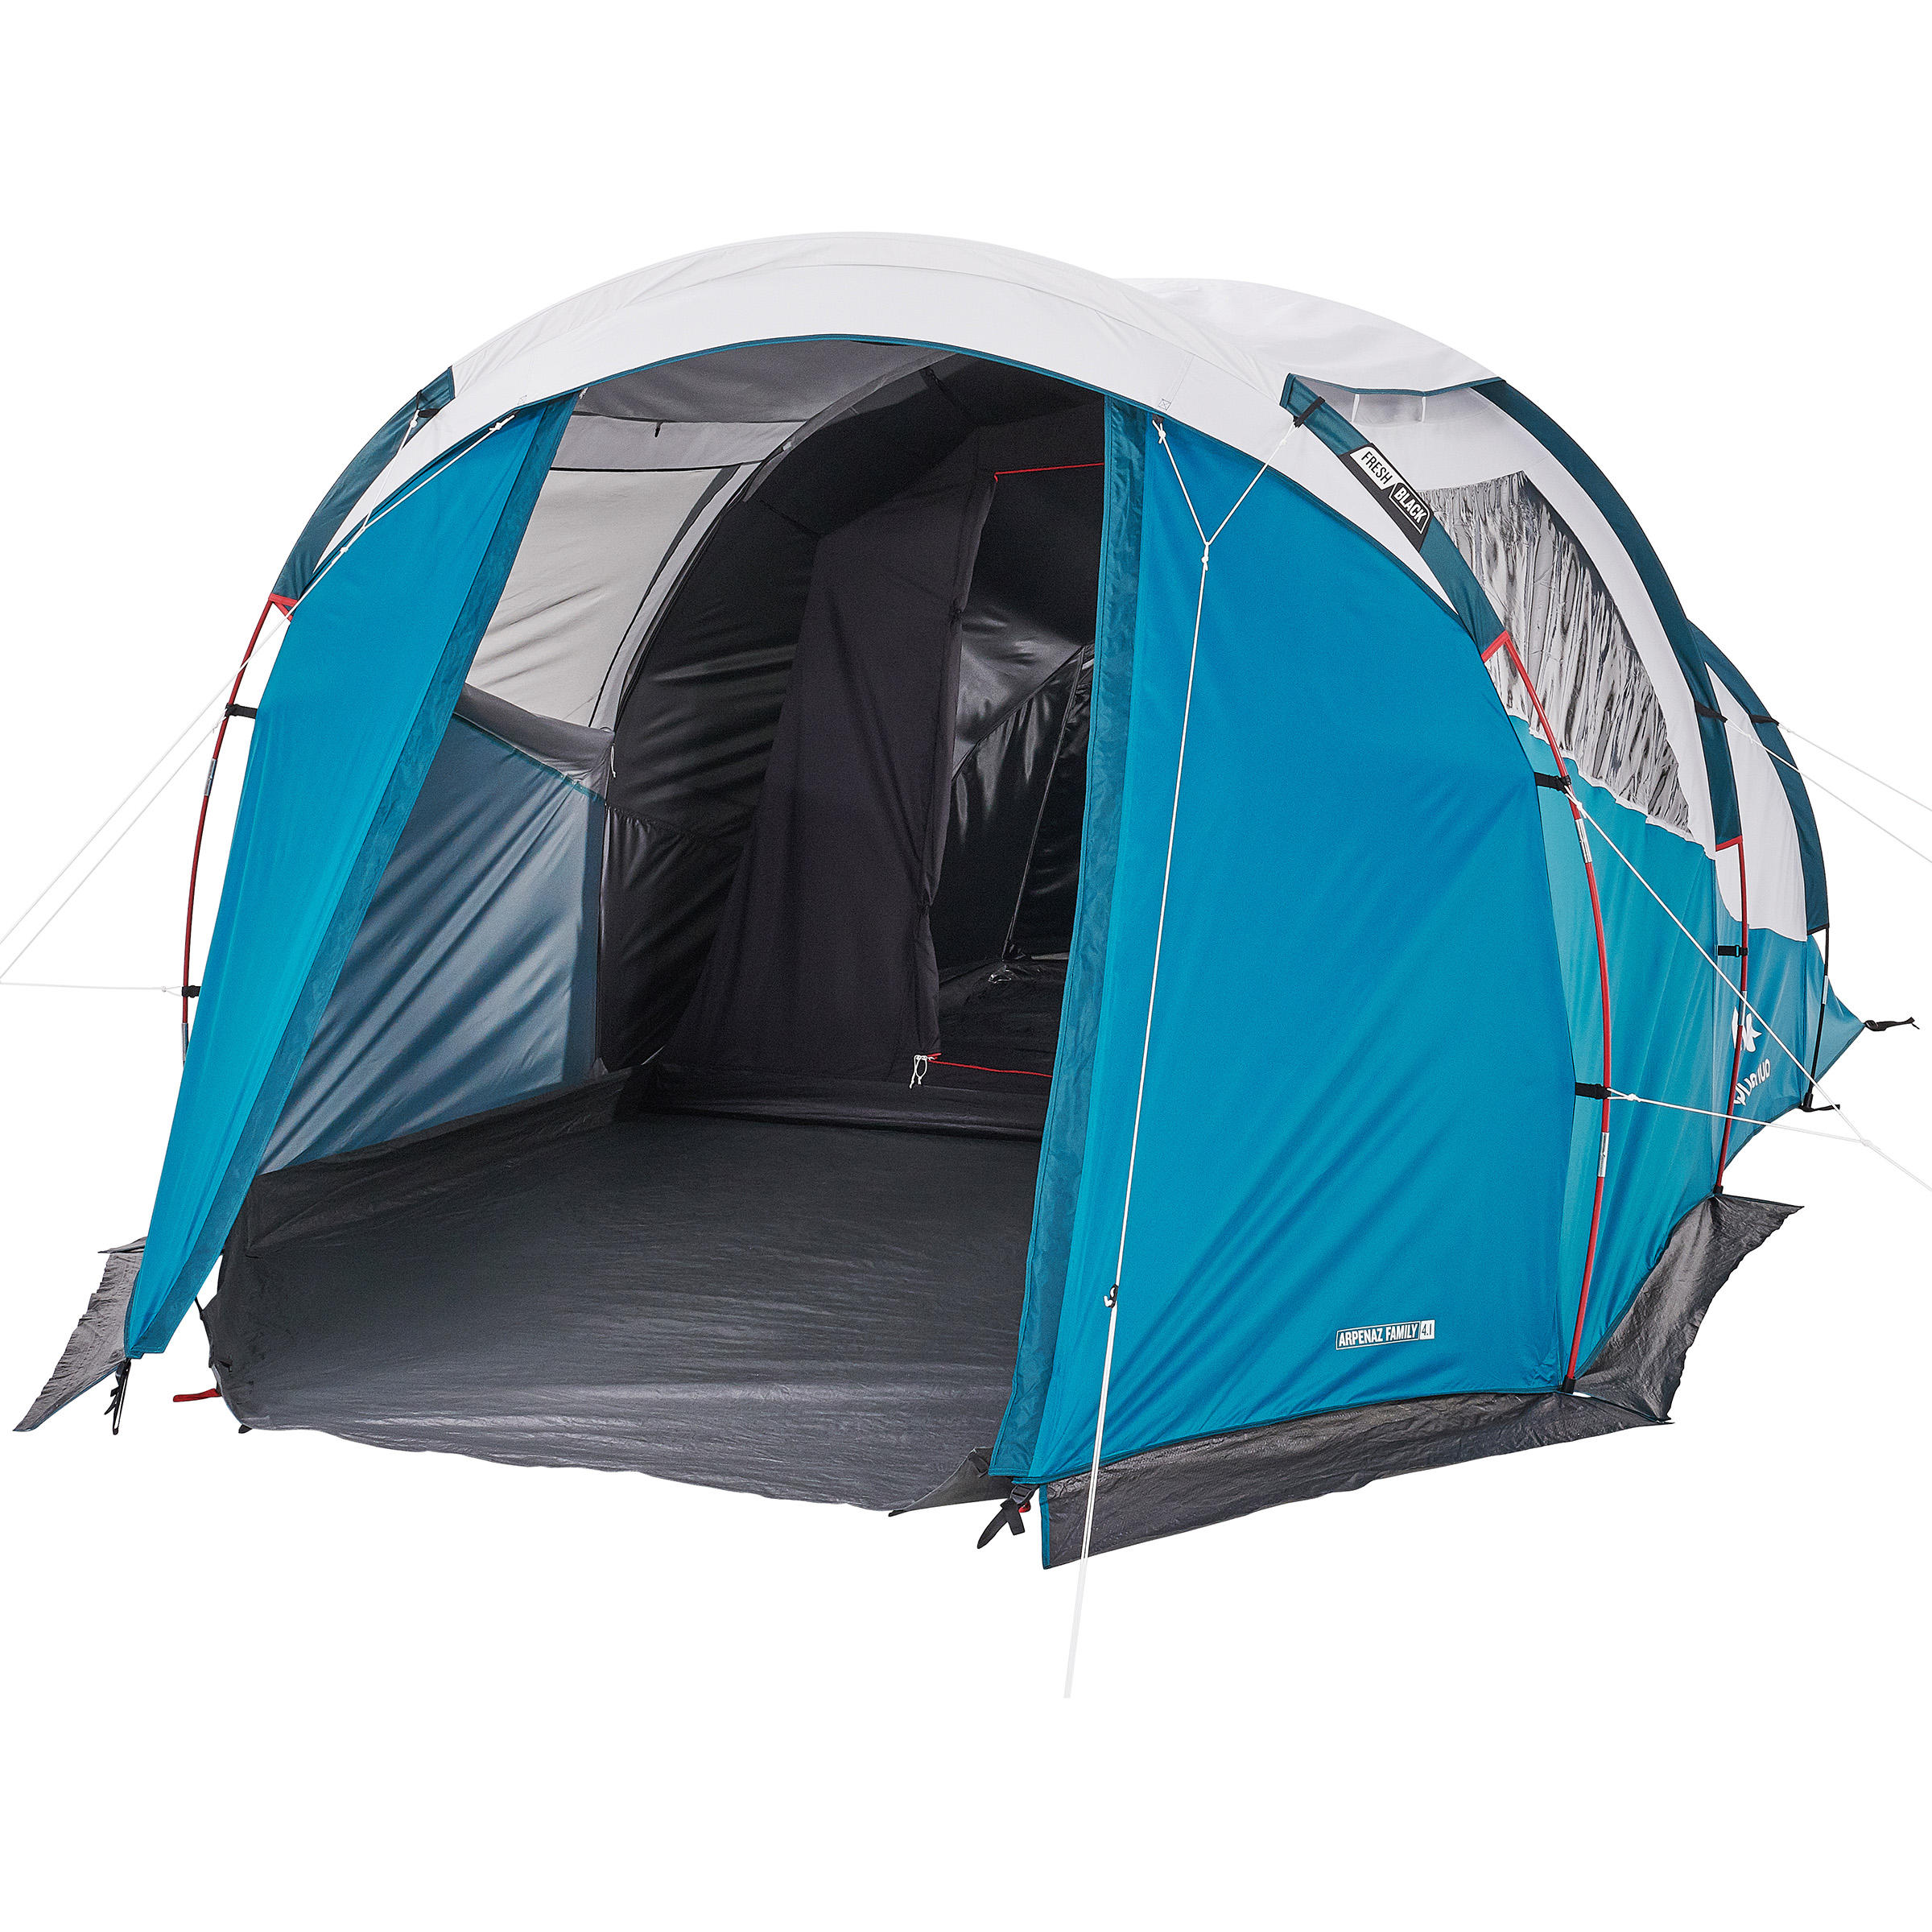 Camping Tent with Poles Arpenaz 4.1 F\u0026B 